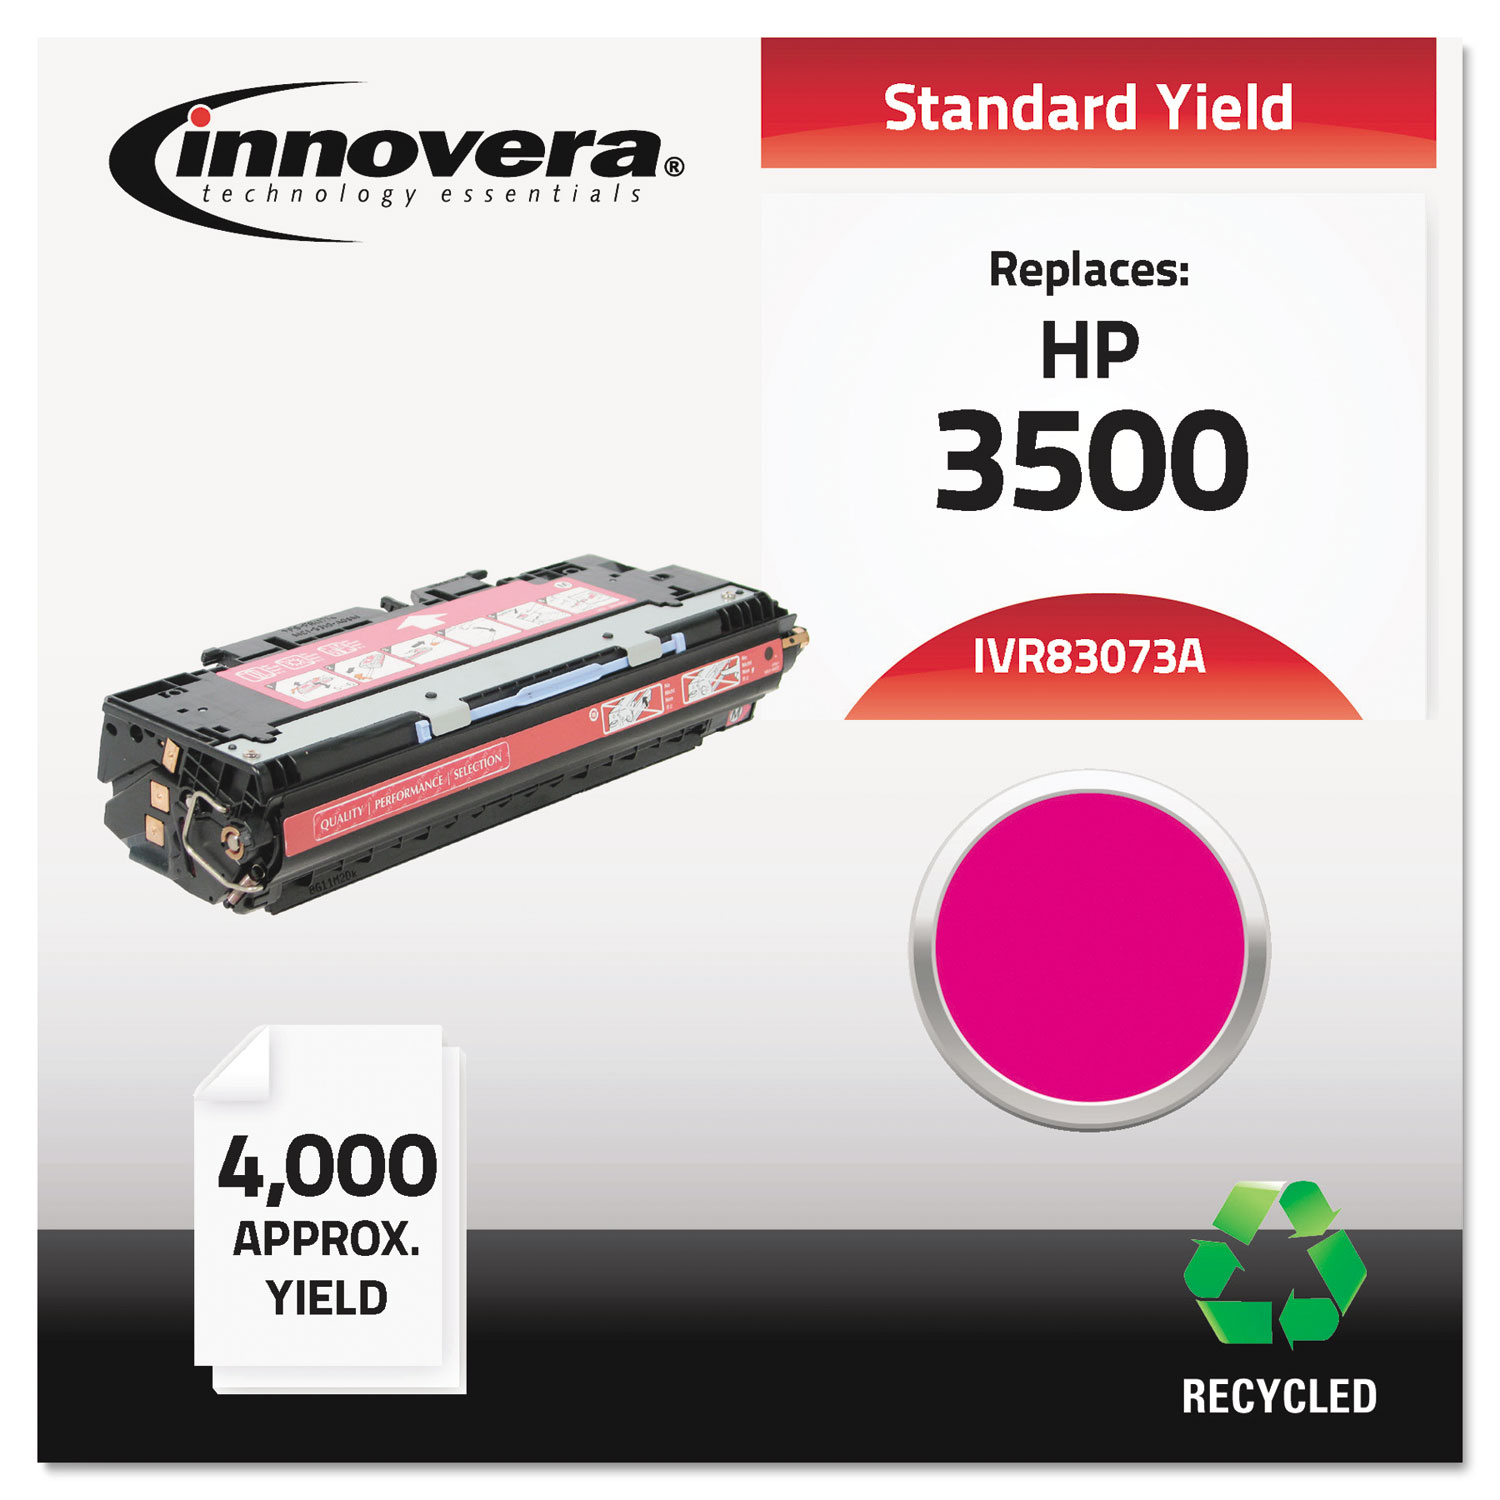  Innovera IVR83073A Remanufactured Q2673A (309A) Toner, 4000 Page-Yield, Magenta (IVR83073A) 